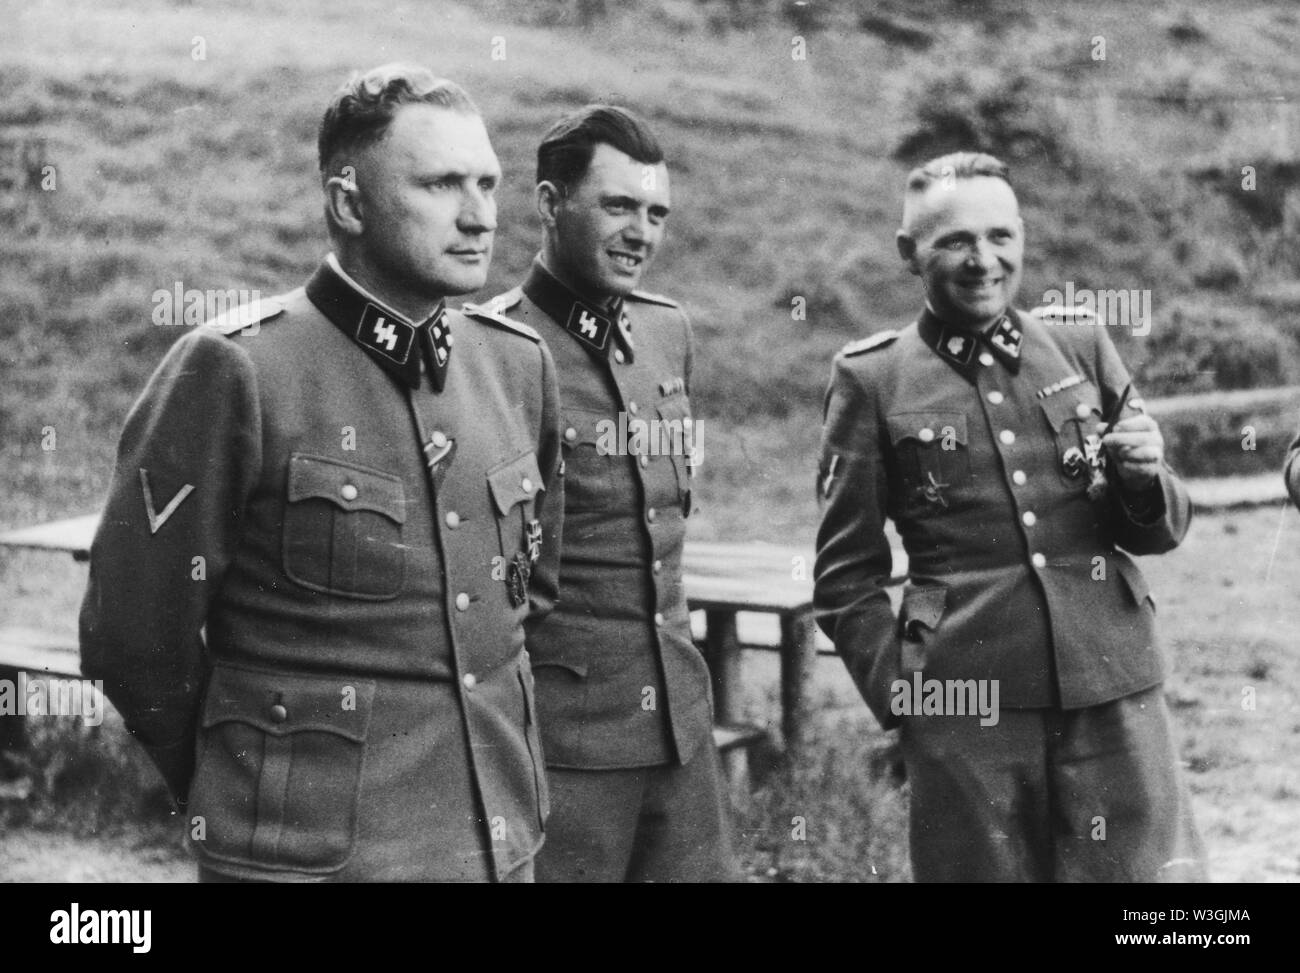 Auschwitz, Poland, Three SS officers socialize on the grounds of the SS retreat outside of Auschwitz, 1944. From left to right they are: Richard Baer (Commandant of Auschwitz), Dr. Josef Mengele and Rudolf Hoess (the former Auschwitz Commandant). Stock Photo